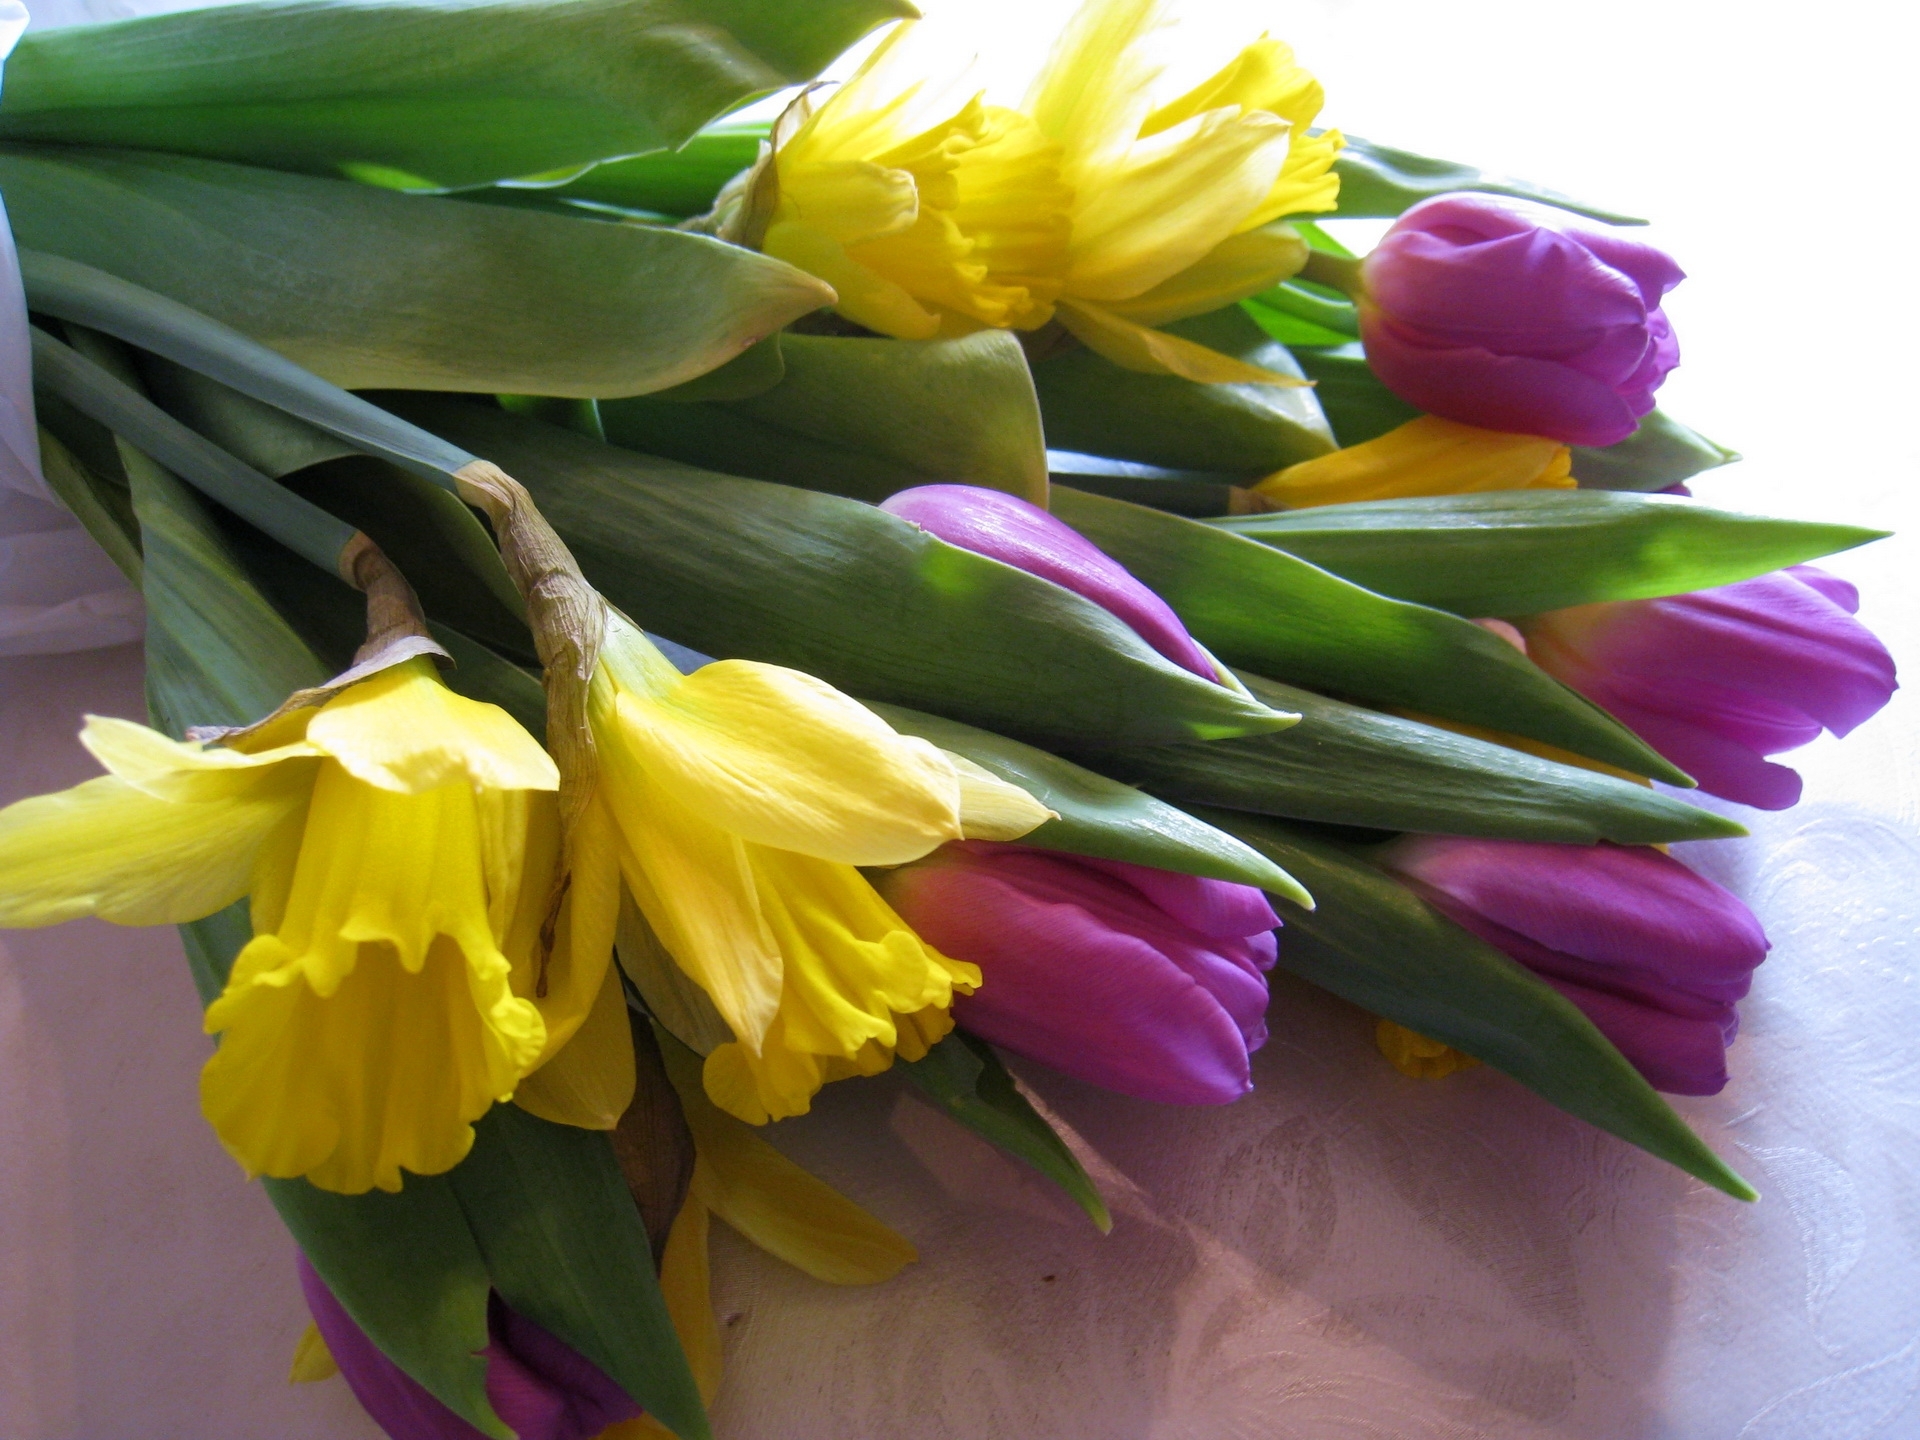 tulips_daffodils_flowers_bouquet_tablecloth_30128_1920x1440